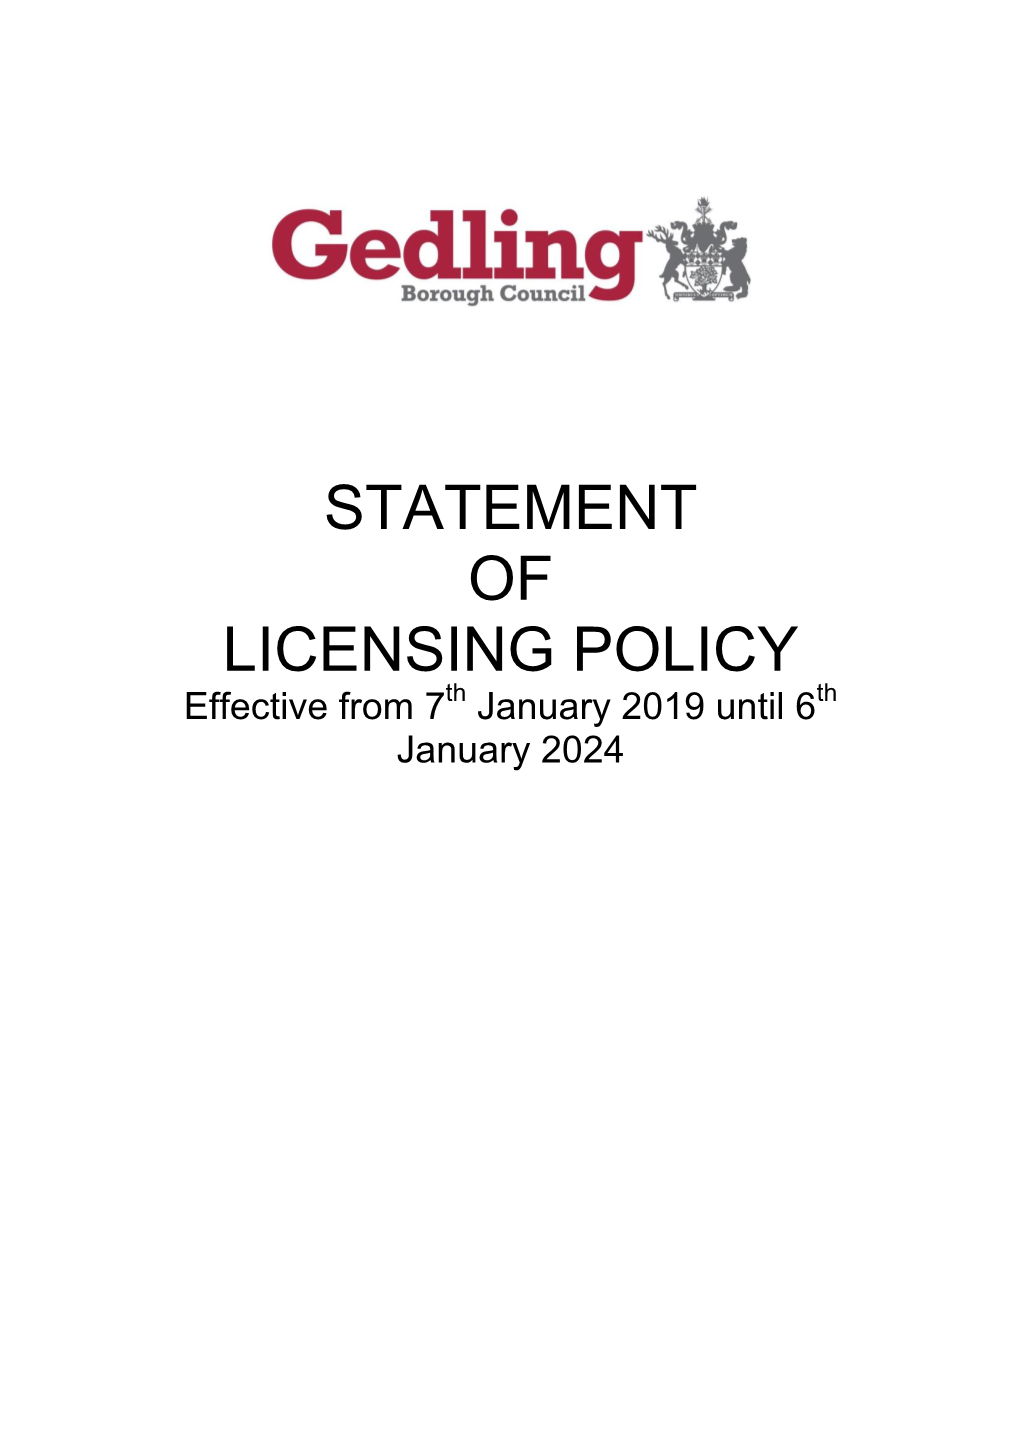 LICENSING POLICY Effective from 7Th January 2019 Until 6Th January 2024